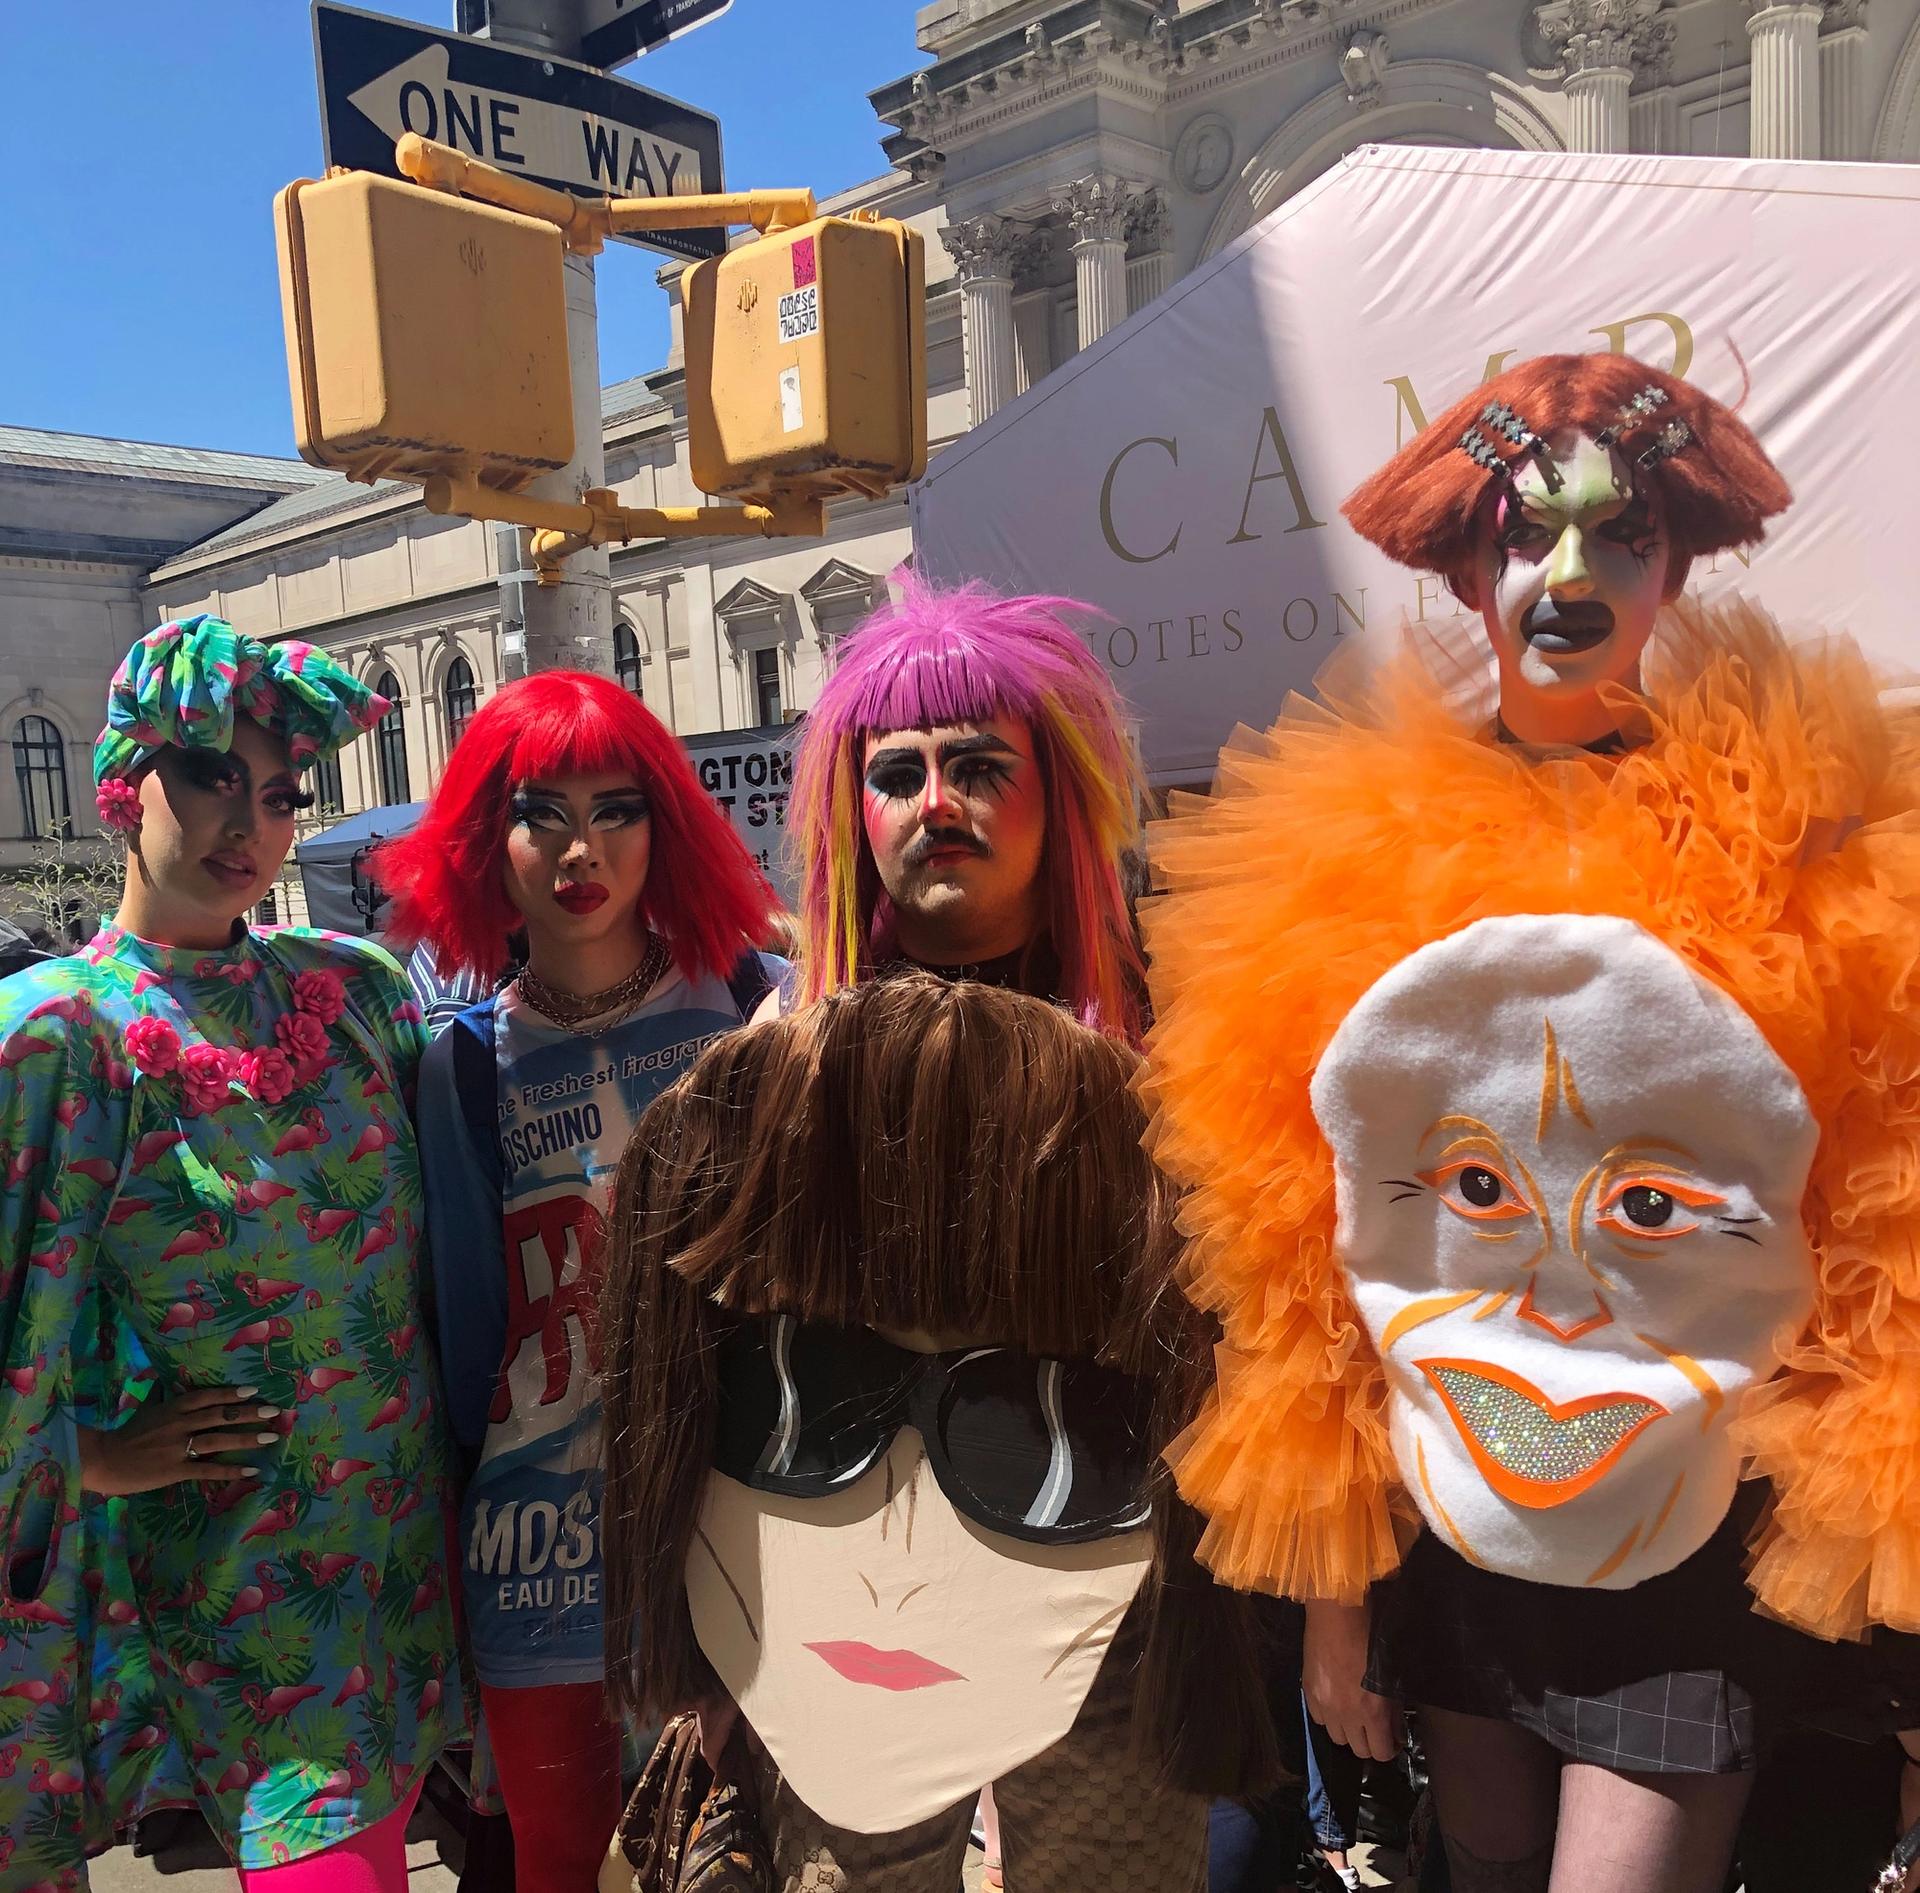 Four friends who took a bus down from Toronto had the best lewks among the onlookers Photo: Victoria Stapley-Brown